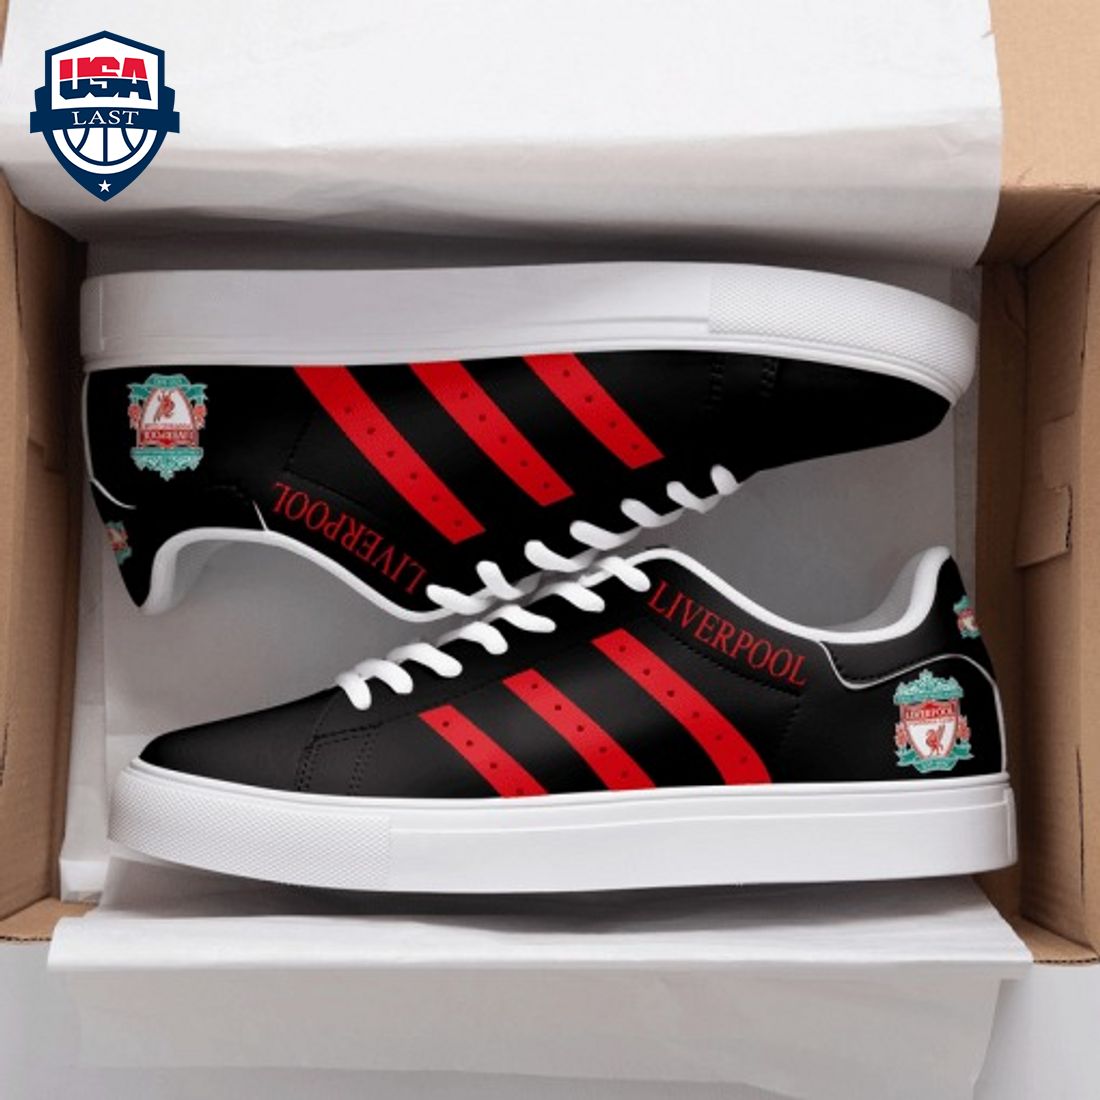 liverpool-fc-red-stripes-style-2-stan-smith-low-top-shoes-1-aoU92.jpg